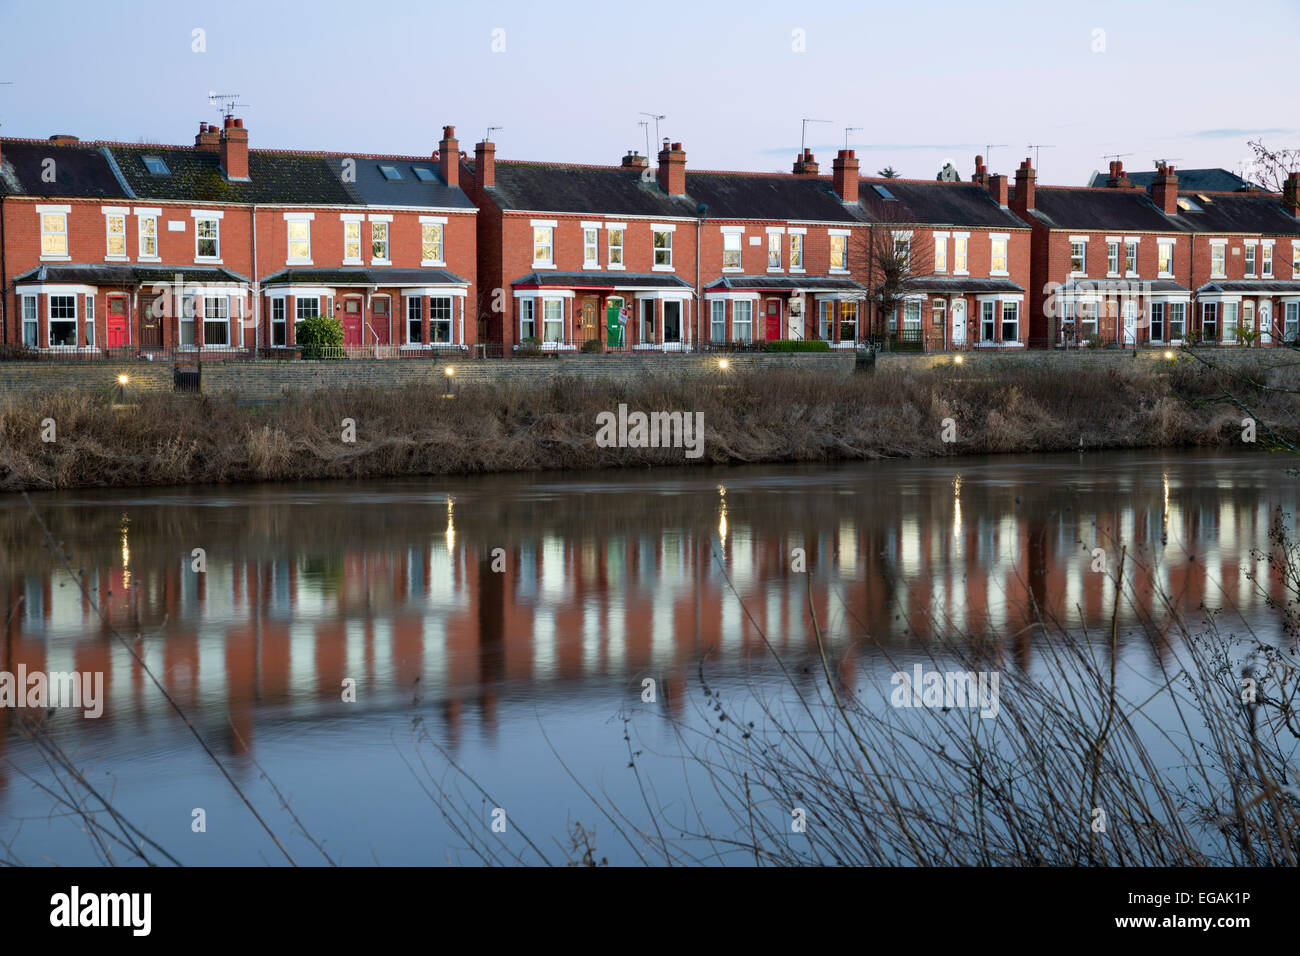 Terrace houses beside the River Severn, Severn Way, Worcester, Worcestershire, England, United Kingdom, Europe Stock Photo